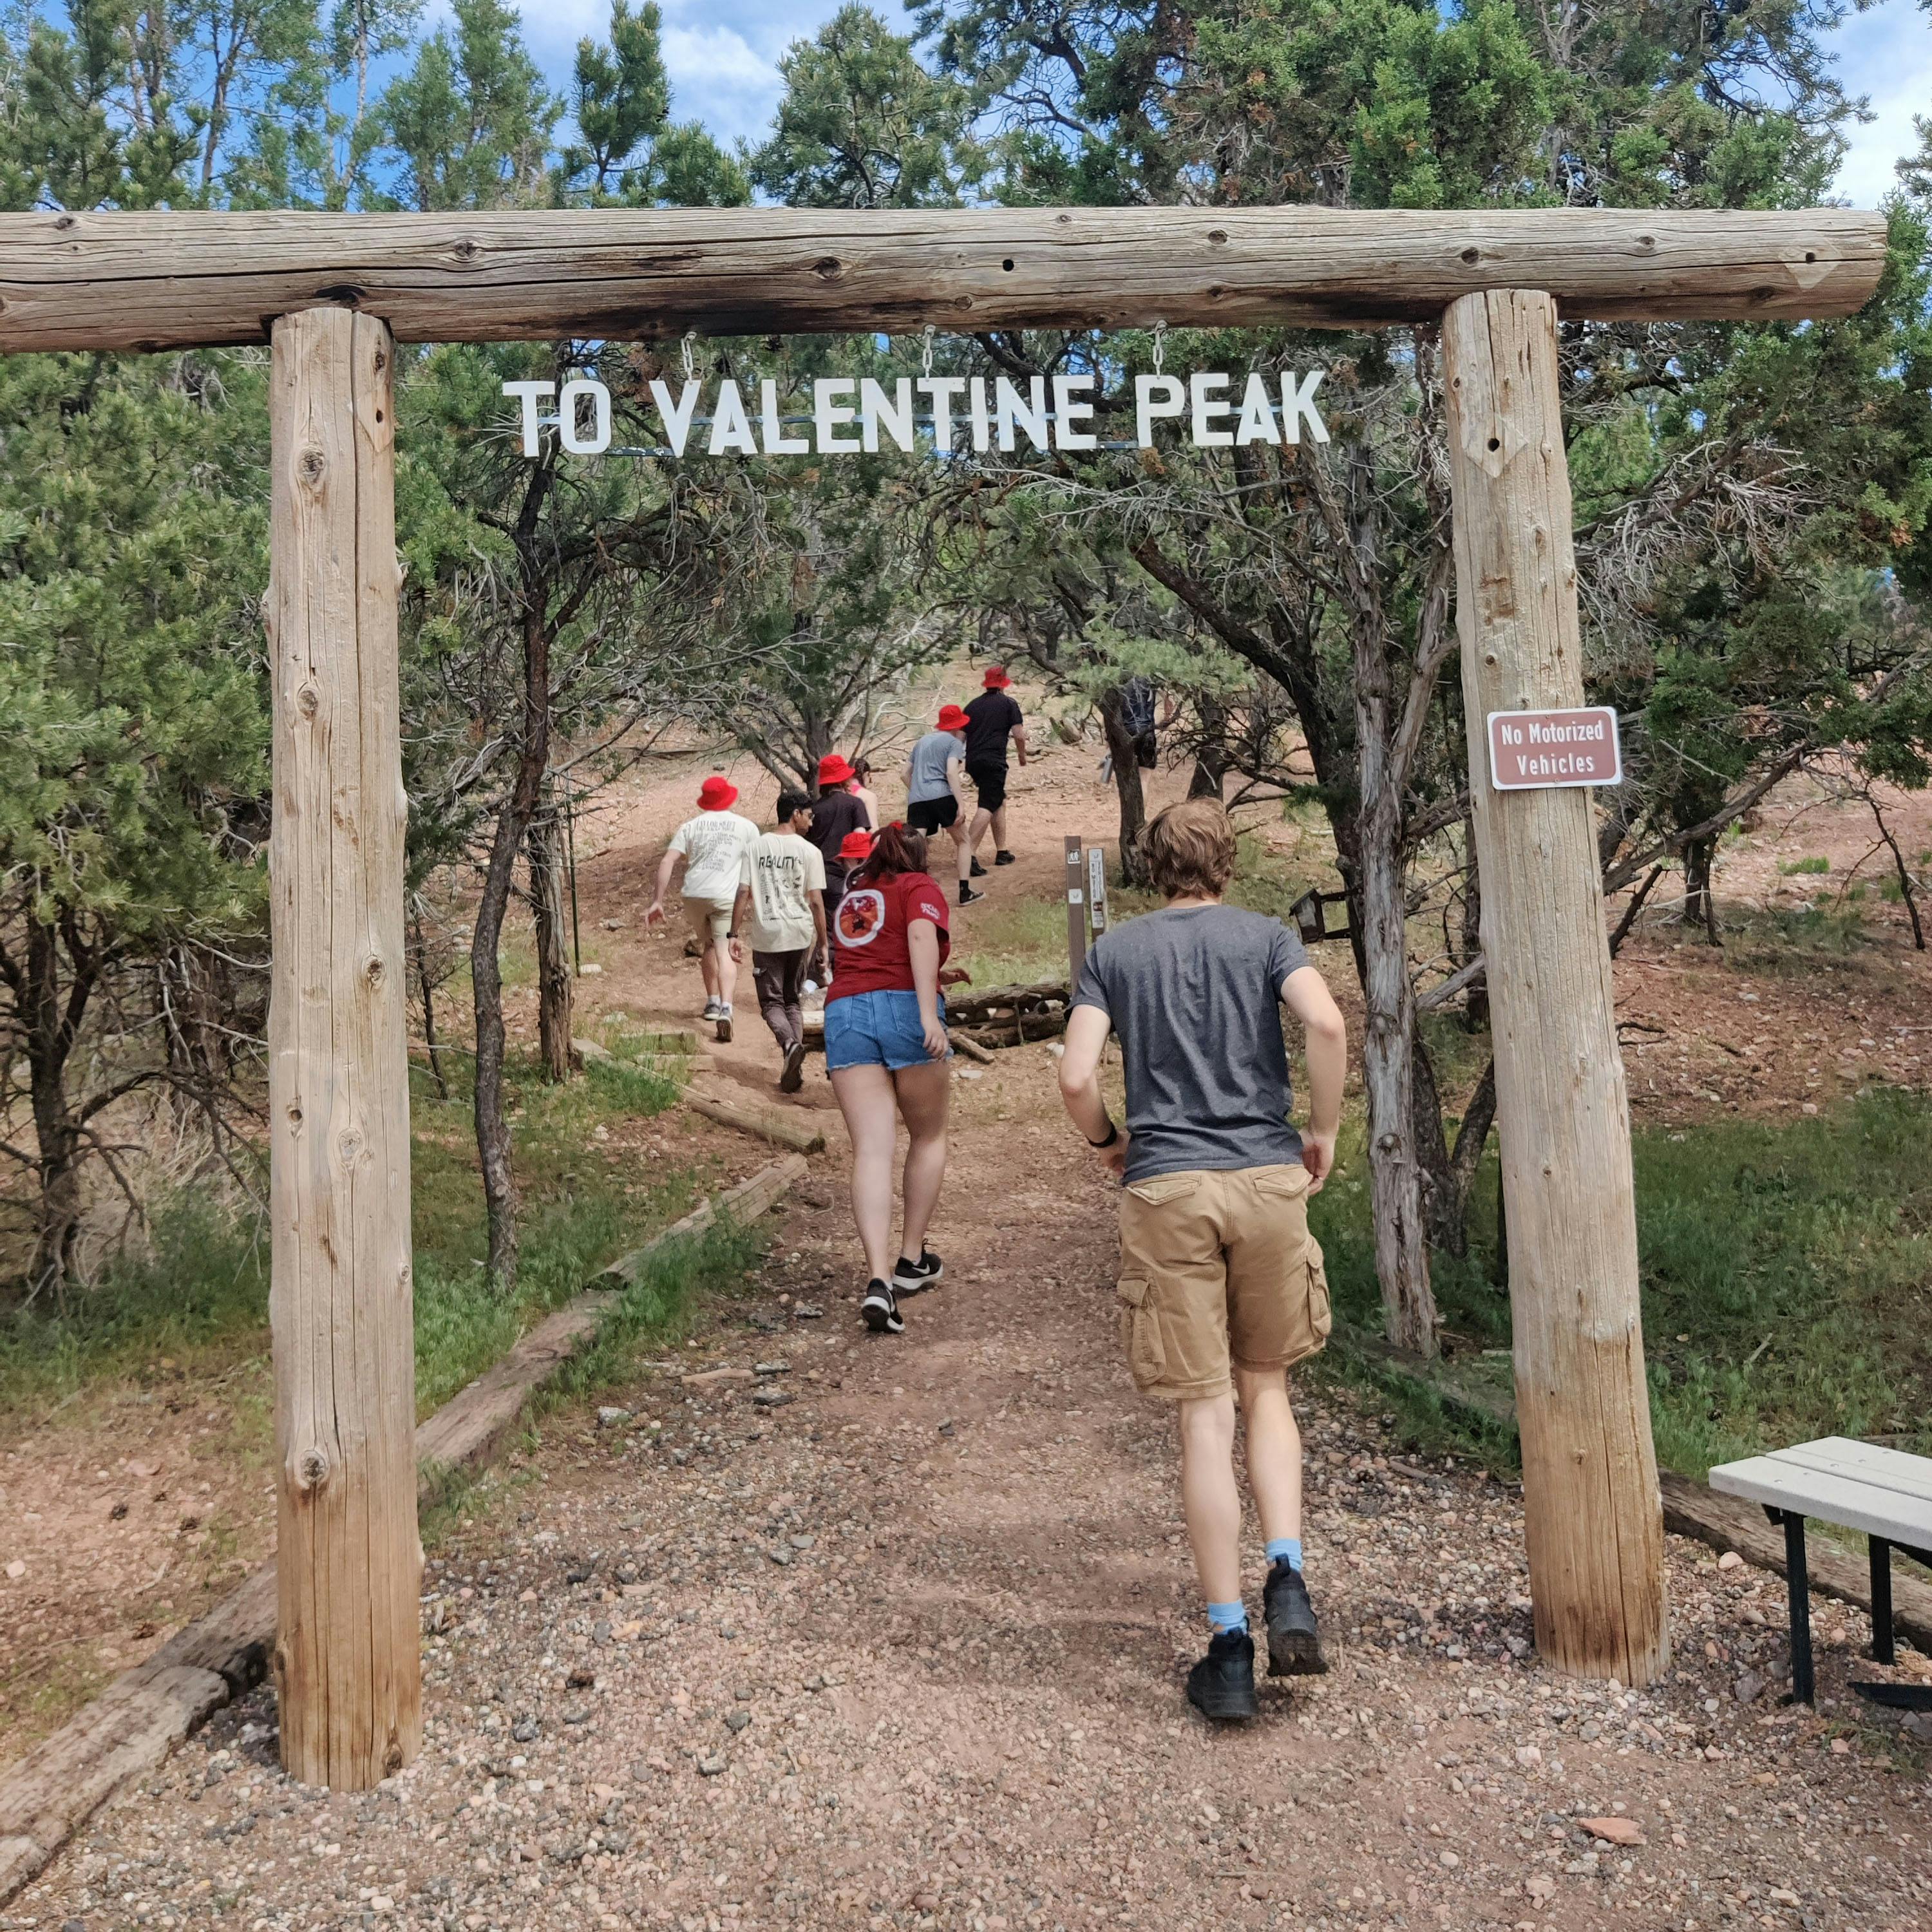 the entrance to the valentine peak trail, with the rover team walking up it